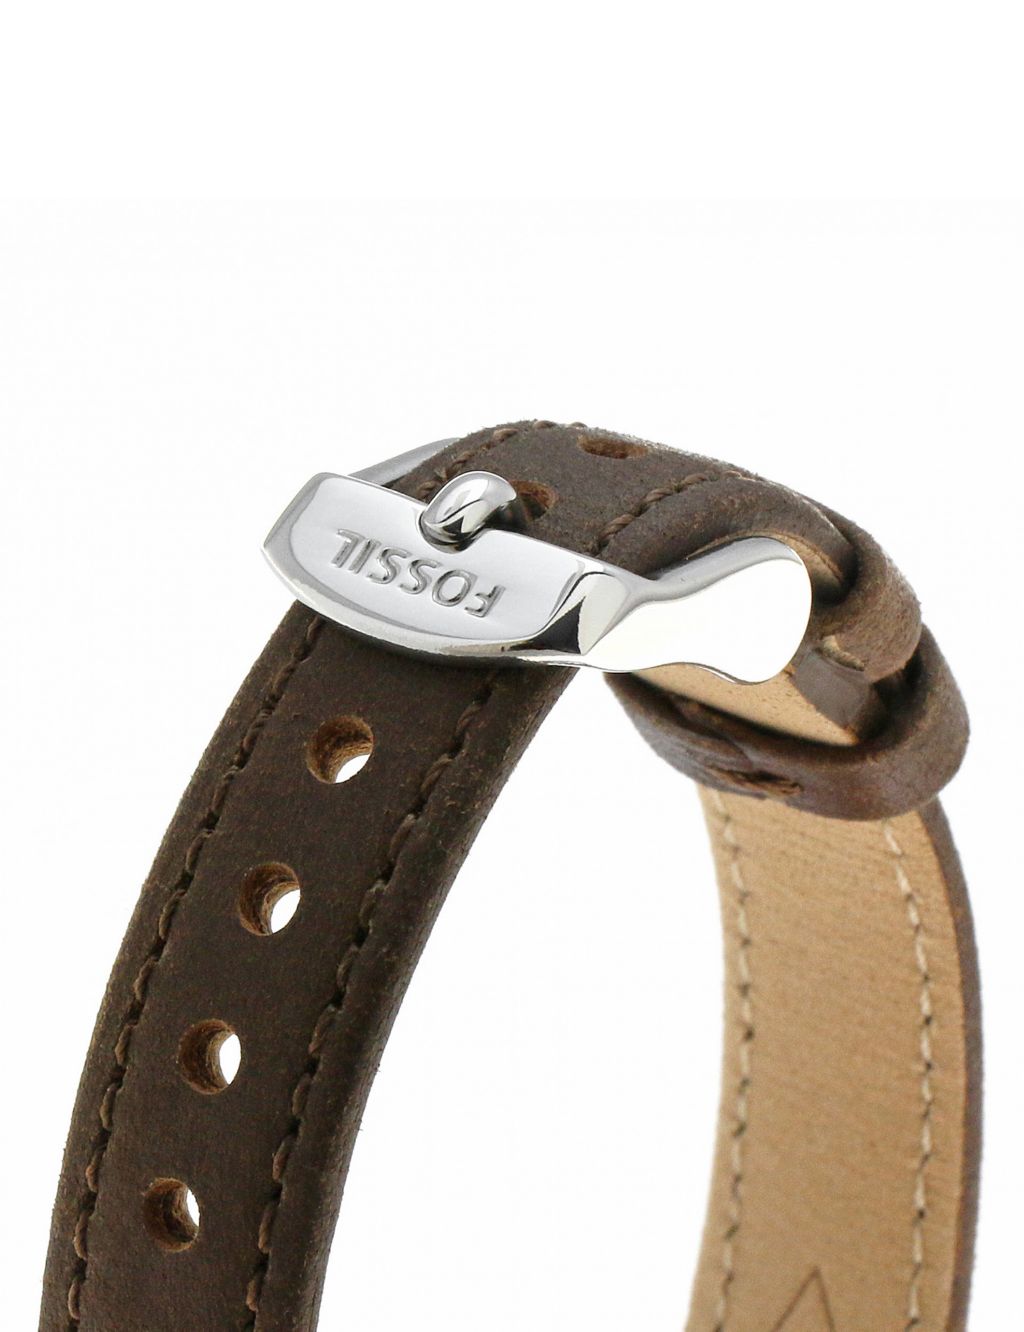 Fossil Jacqueline Brown Leather Watch image 3